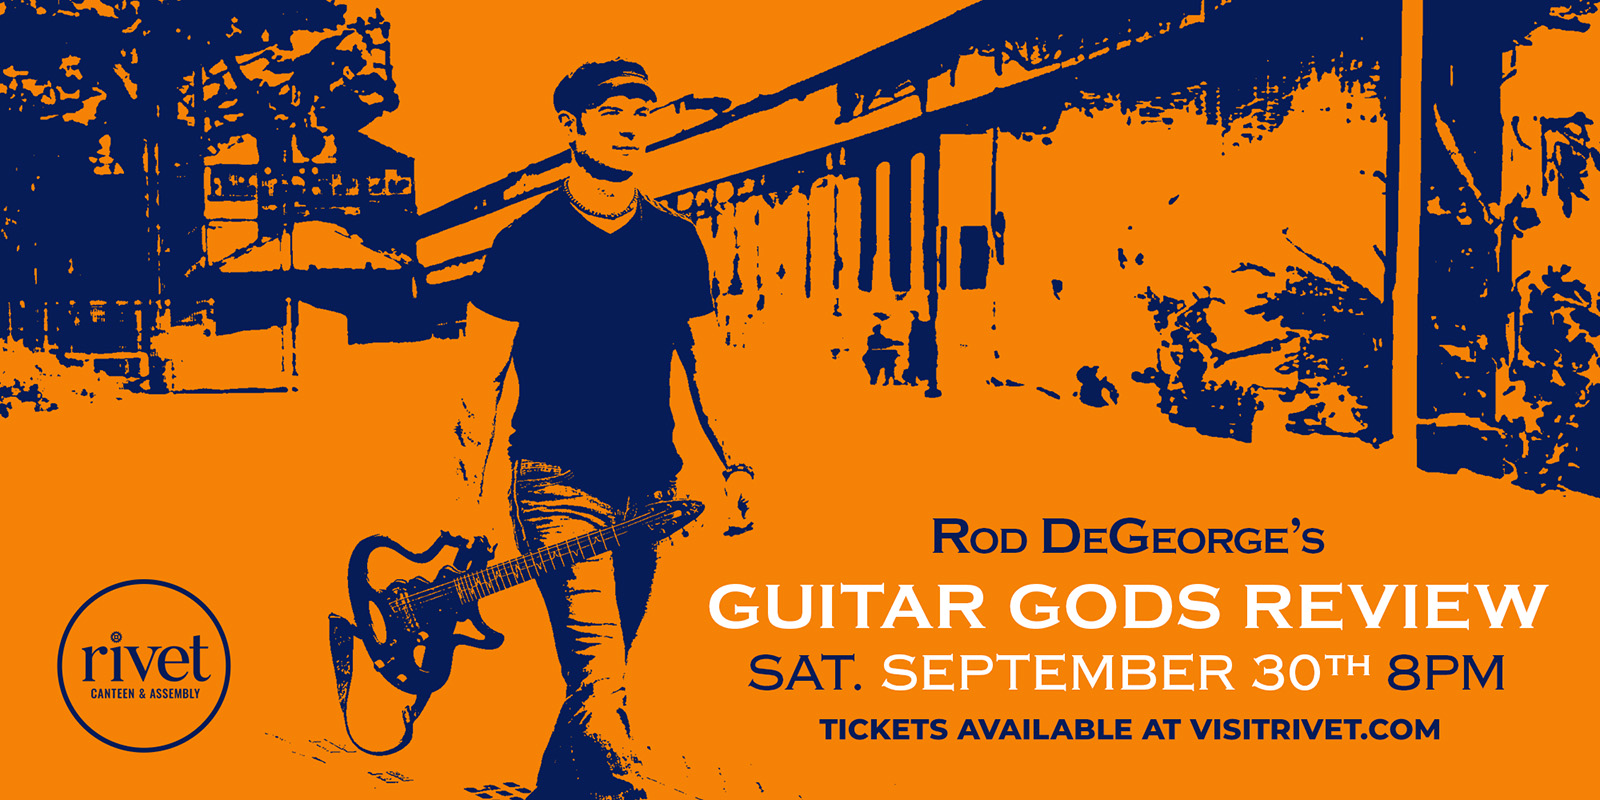 Rod DeGeorge's Guitar Gods Review at Rivet: Canteen & Assembly on Saturday, September 30th, 2023. Get your tickets now!